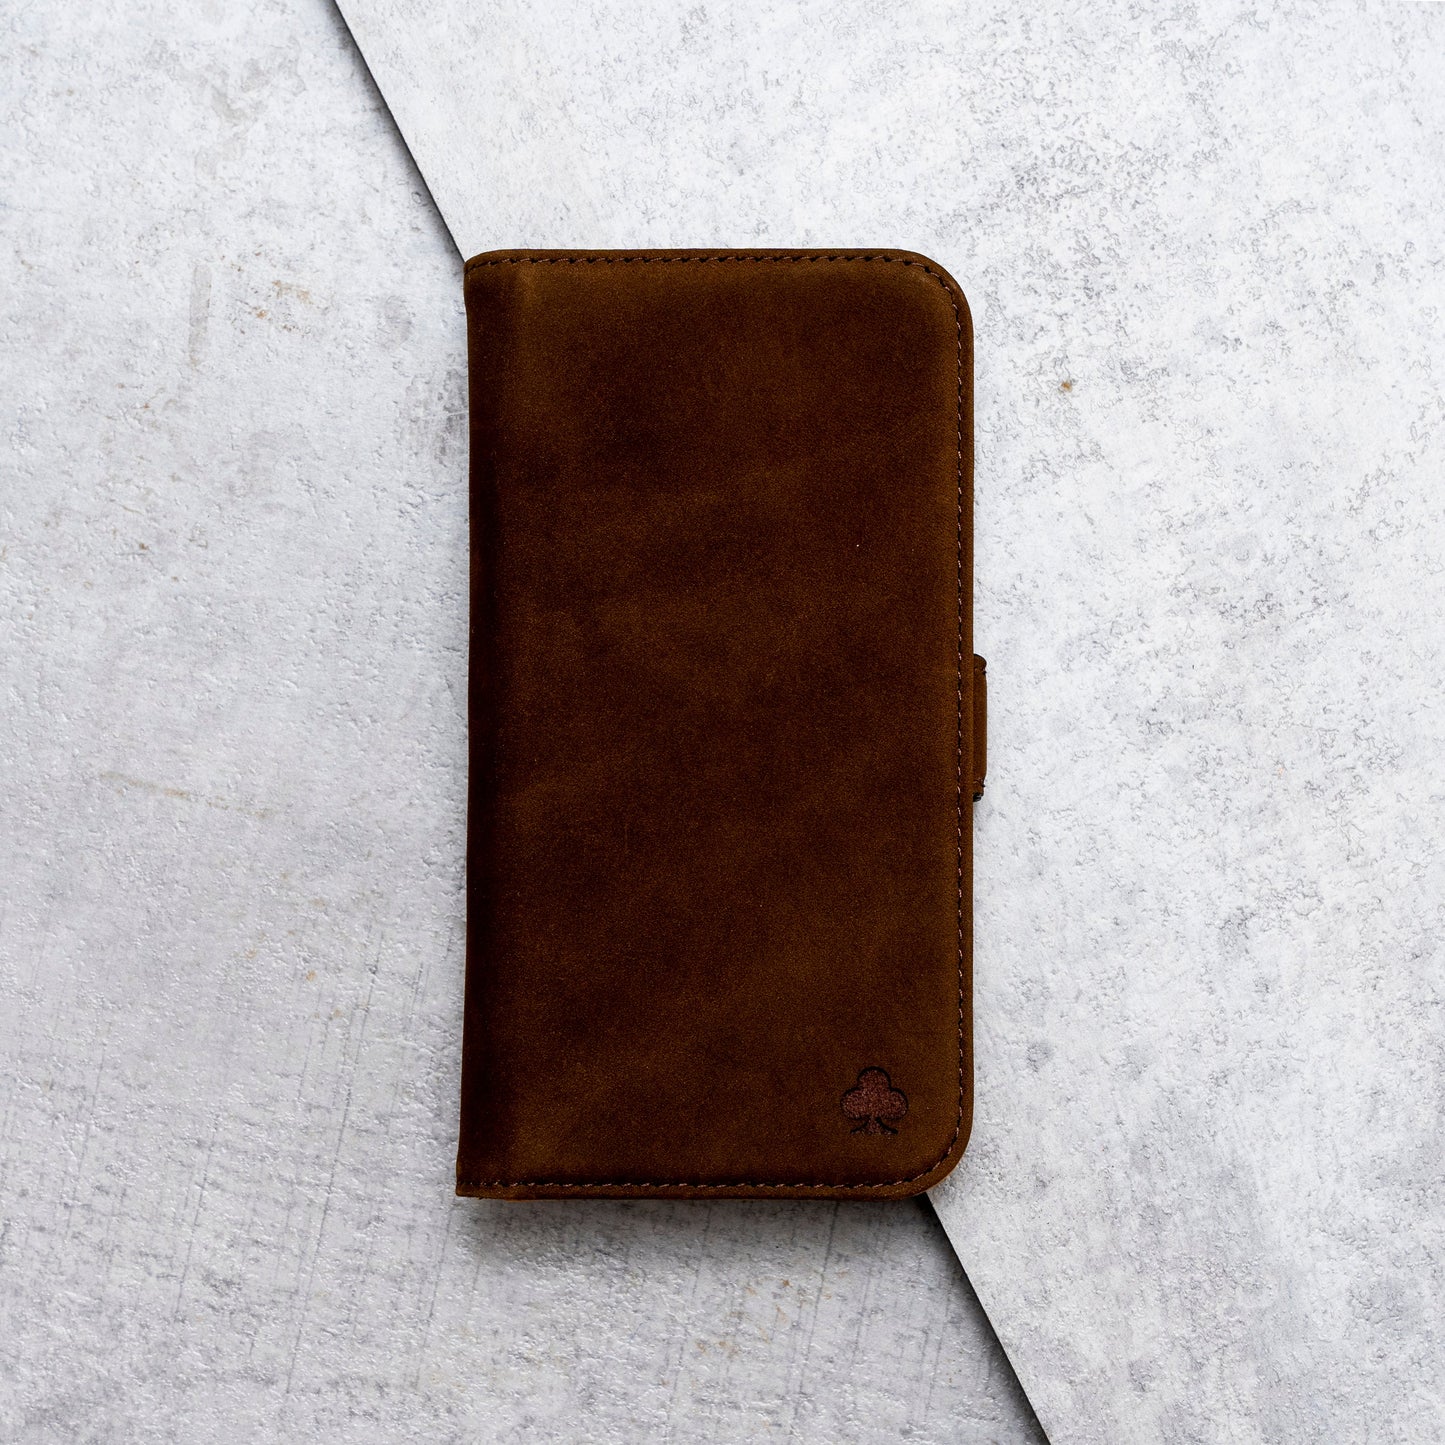 iPhone 15 Pro Leather Case. Premium Nubuck Genuine Leather Stand Case/Cover/Wallet (Chocolate Brown)